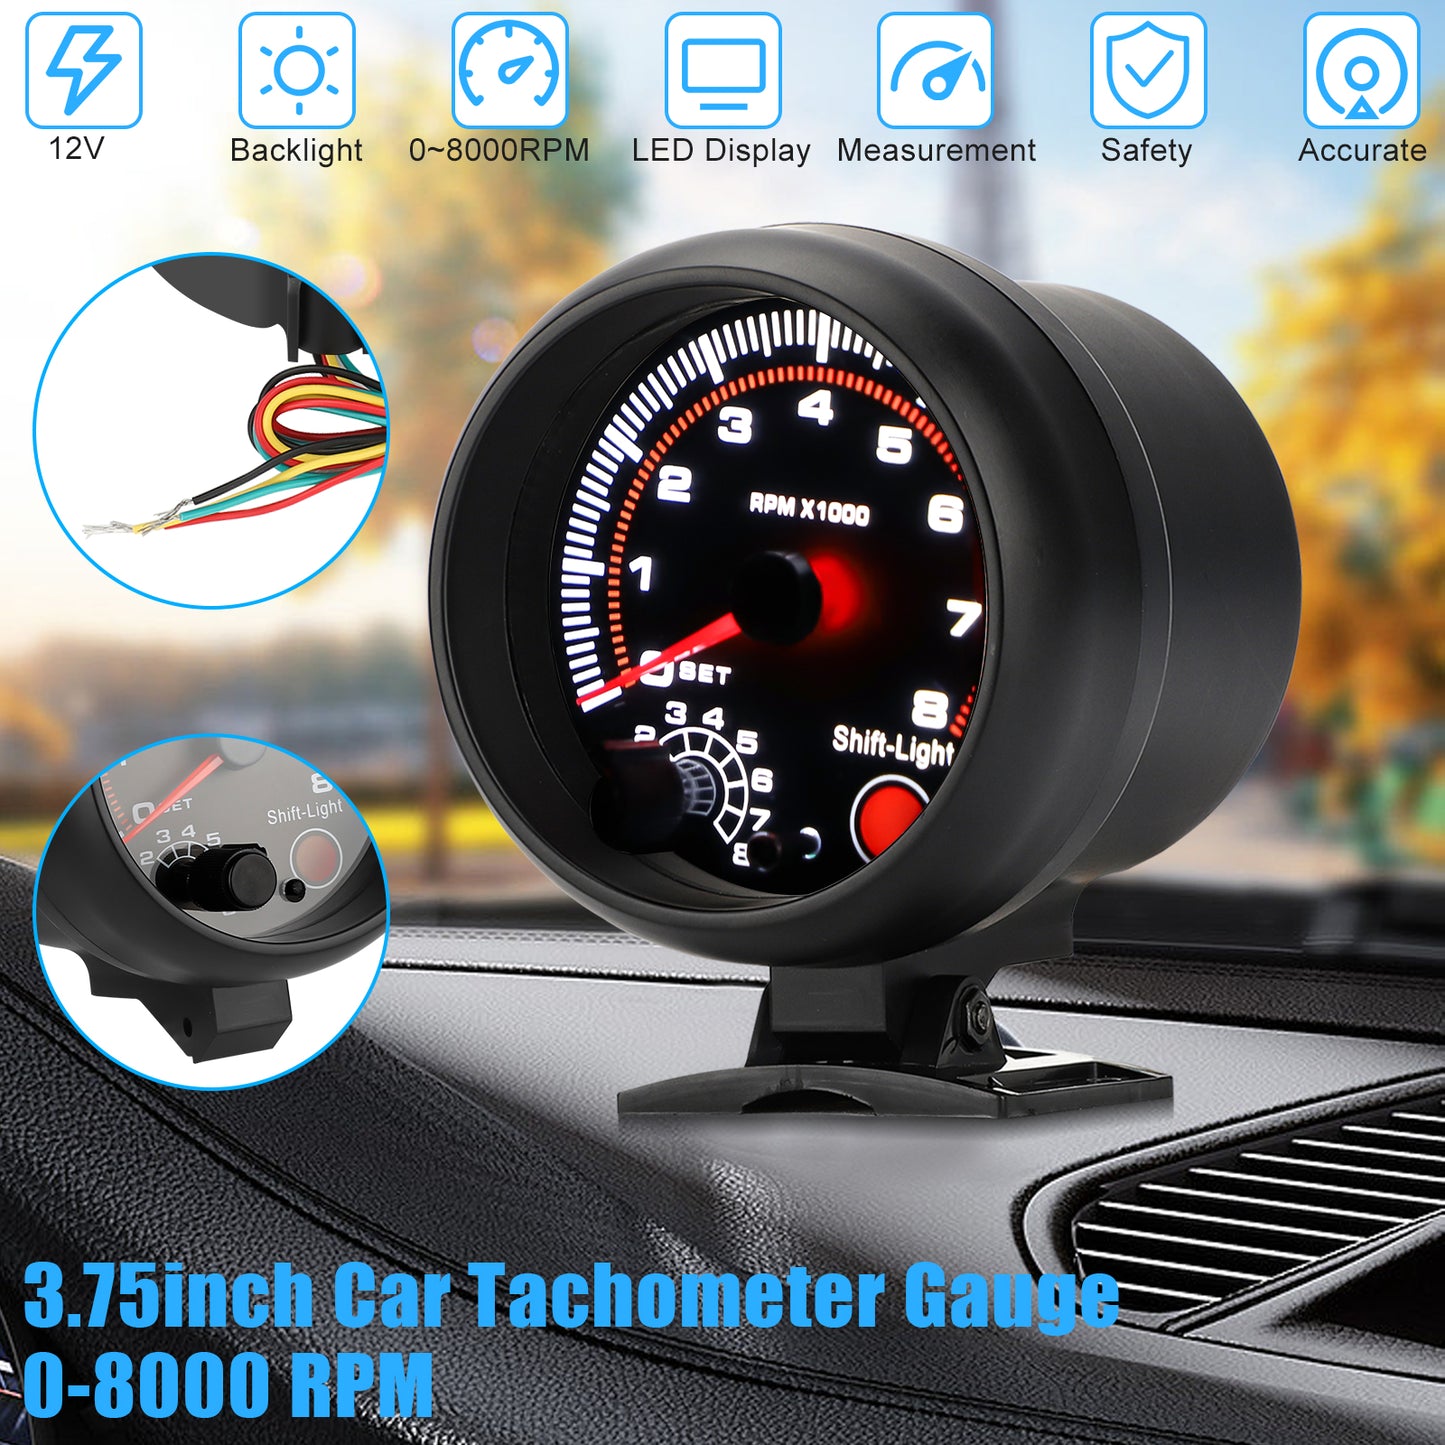 Versatile Car Tachometer Gauge - Accurate RPM Measurement with Backlight and Shift Light